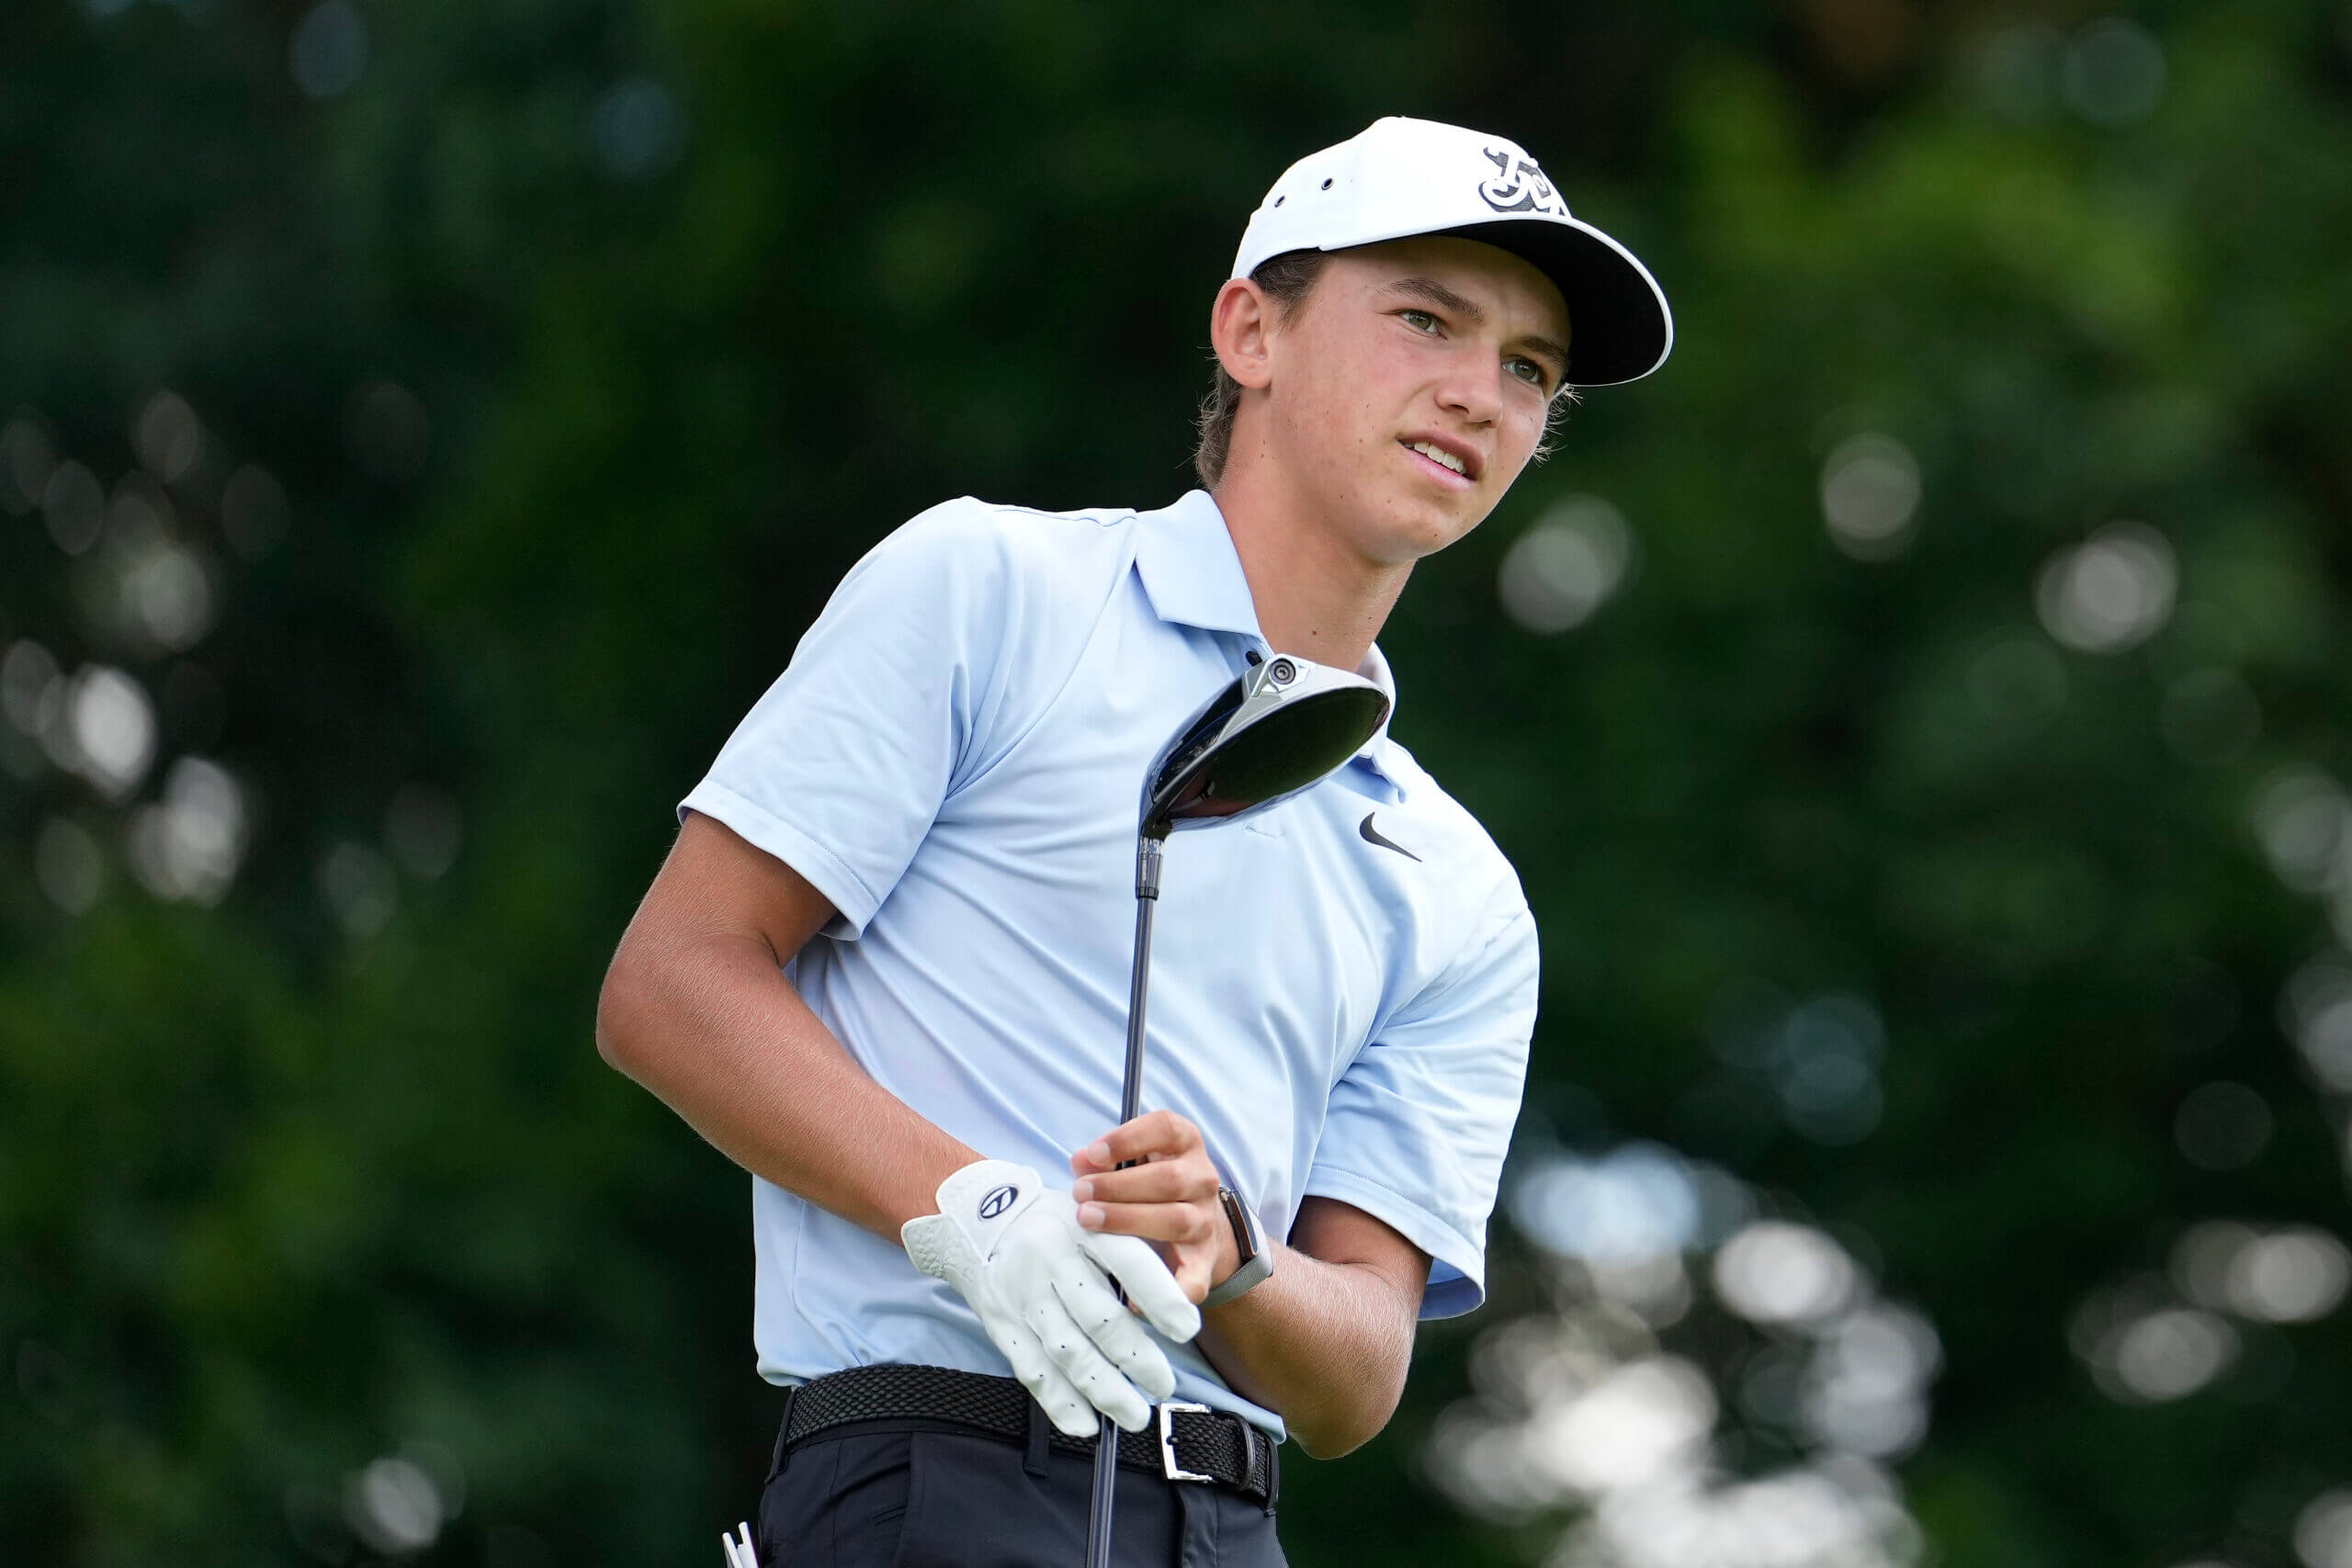 Miles Russell, 15, made his PGA Tour debut.  It was strangely normal